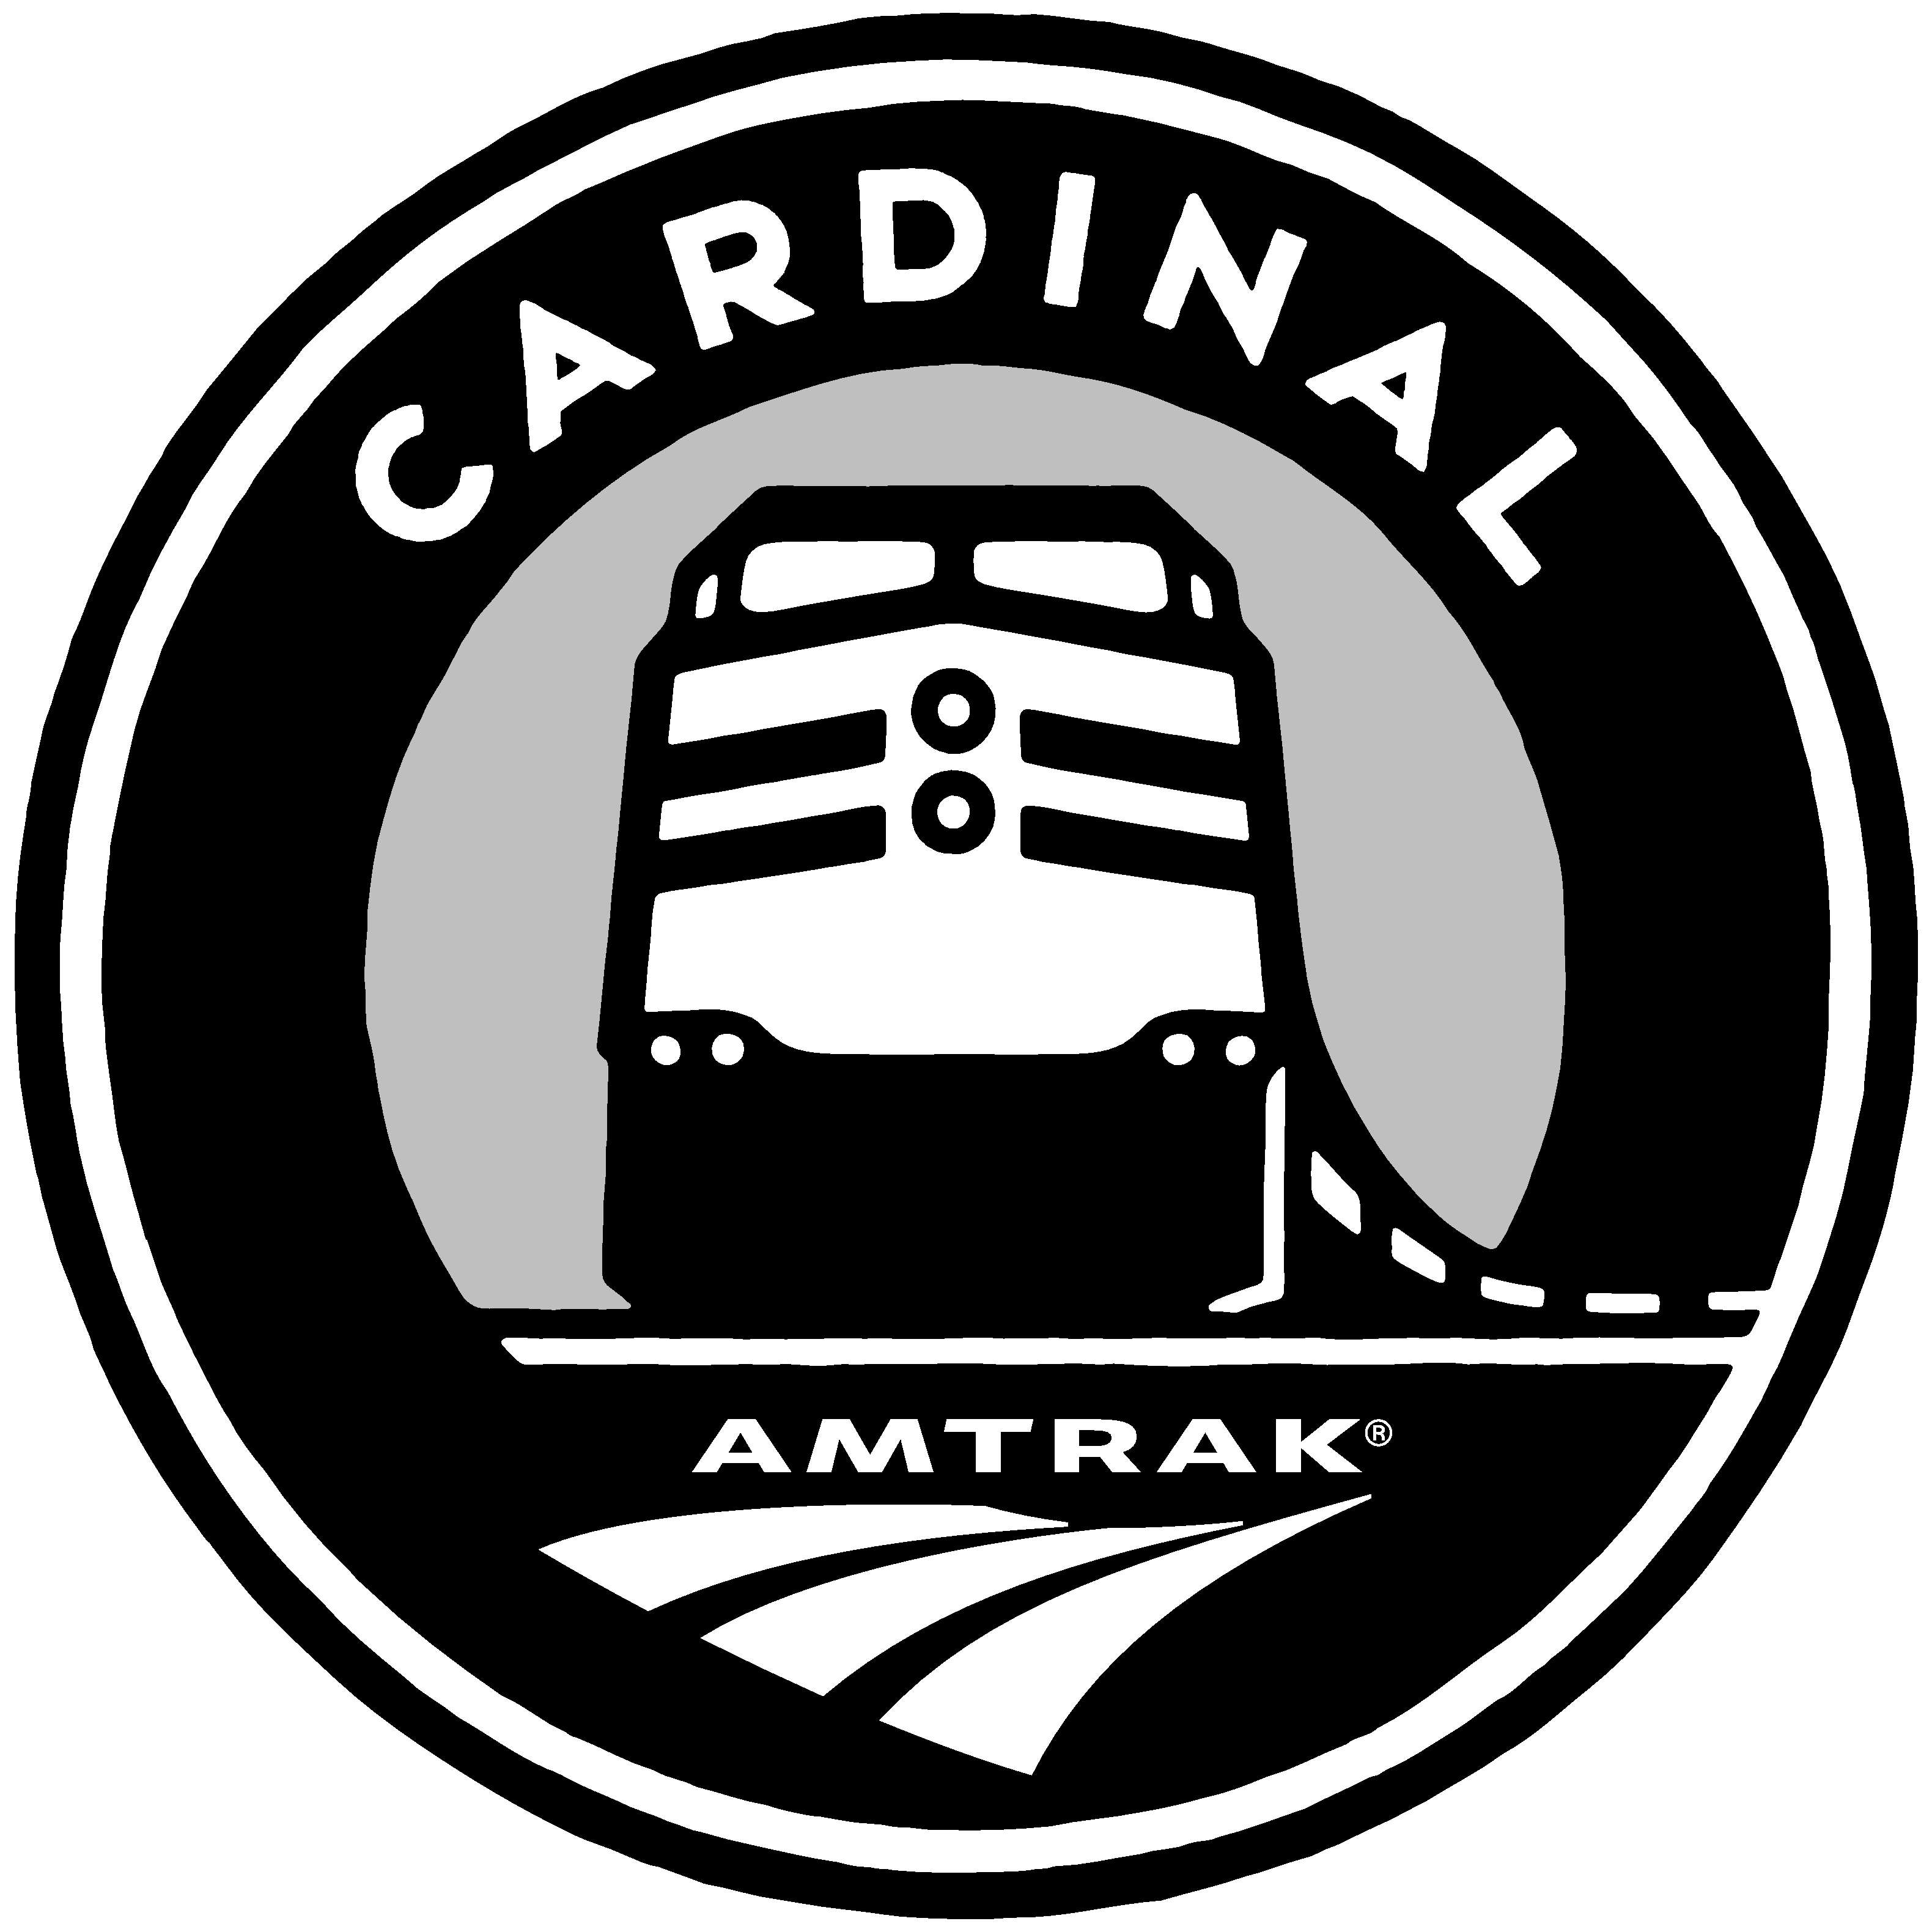 Heading East On The Cardinal. | TRAINS & TRAVEL WITH JIM LOOMIS